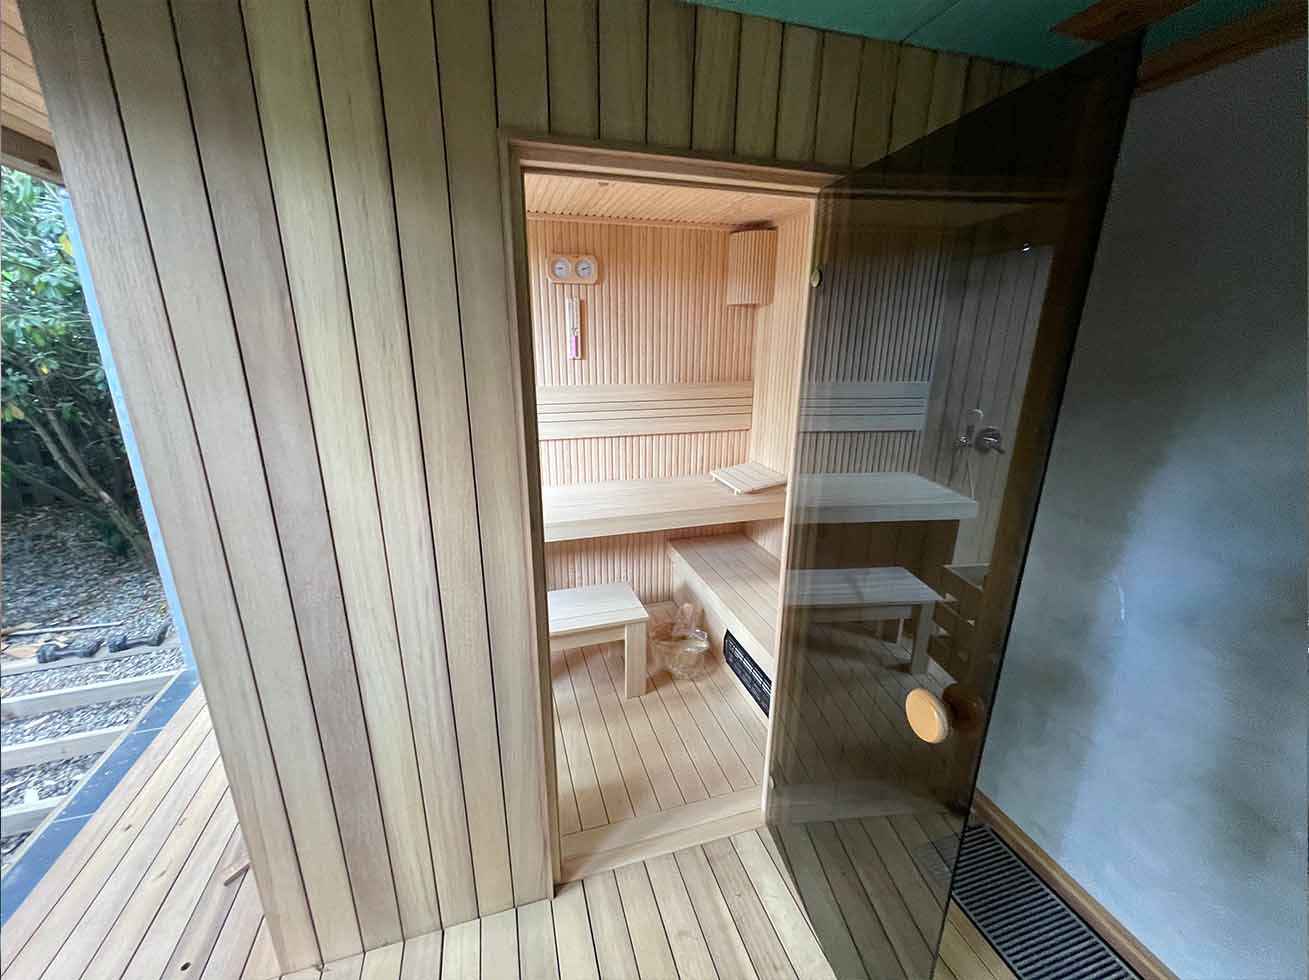 Frankfurt's Rural Haven: Countryside Sauna for Relaxation